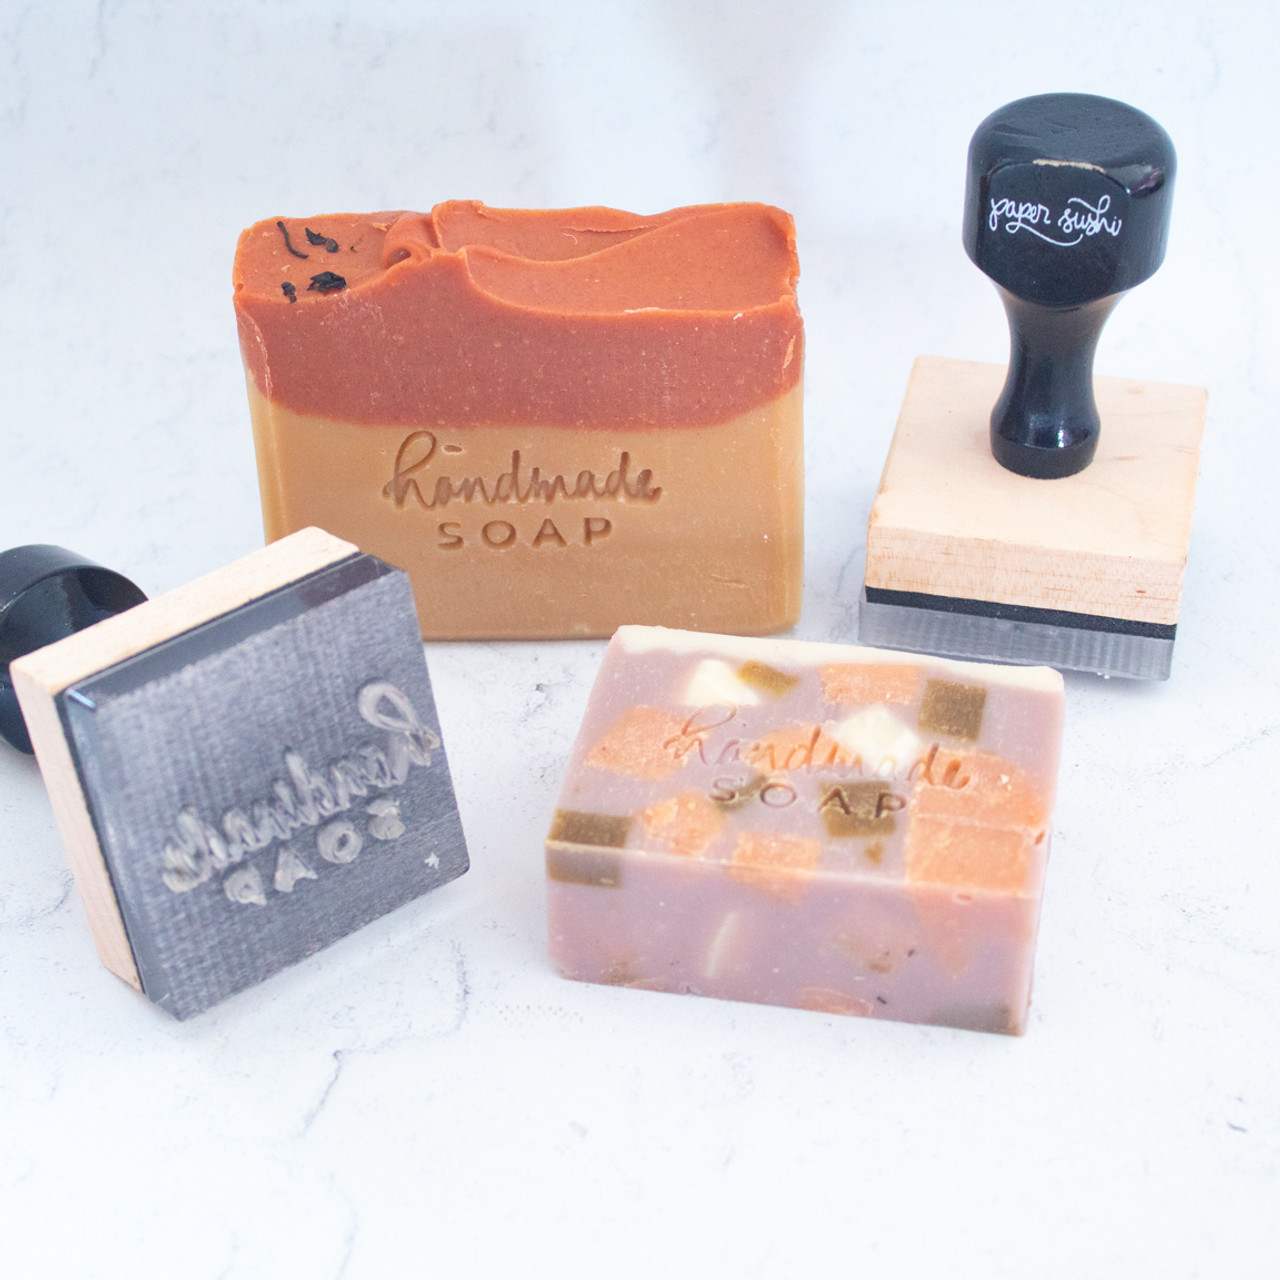 Cold Stamping Stamps, Acrylic Stamp, Soap Stamp, Seal Soaps